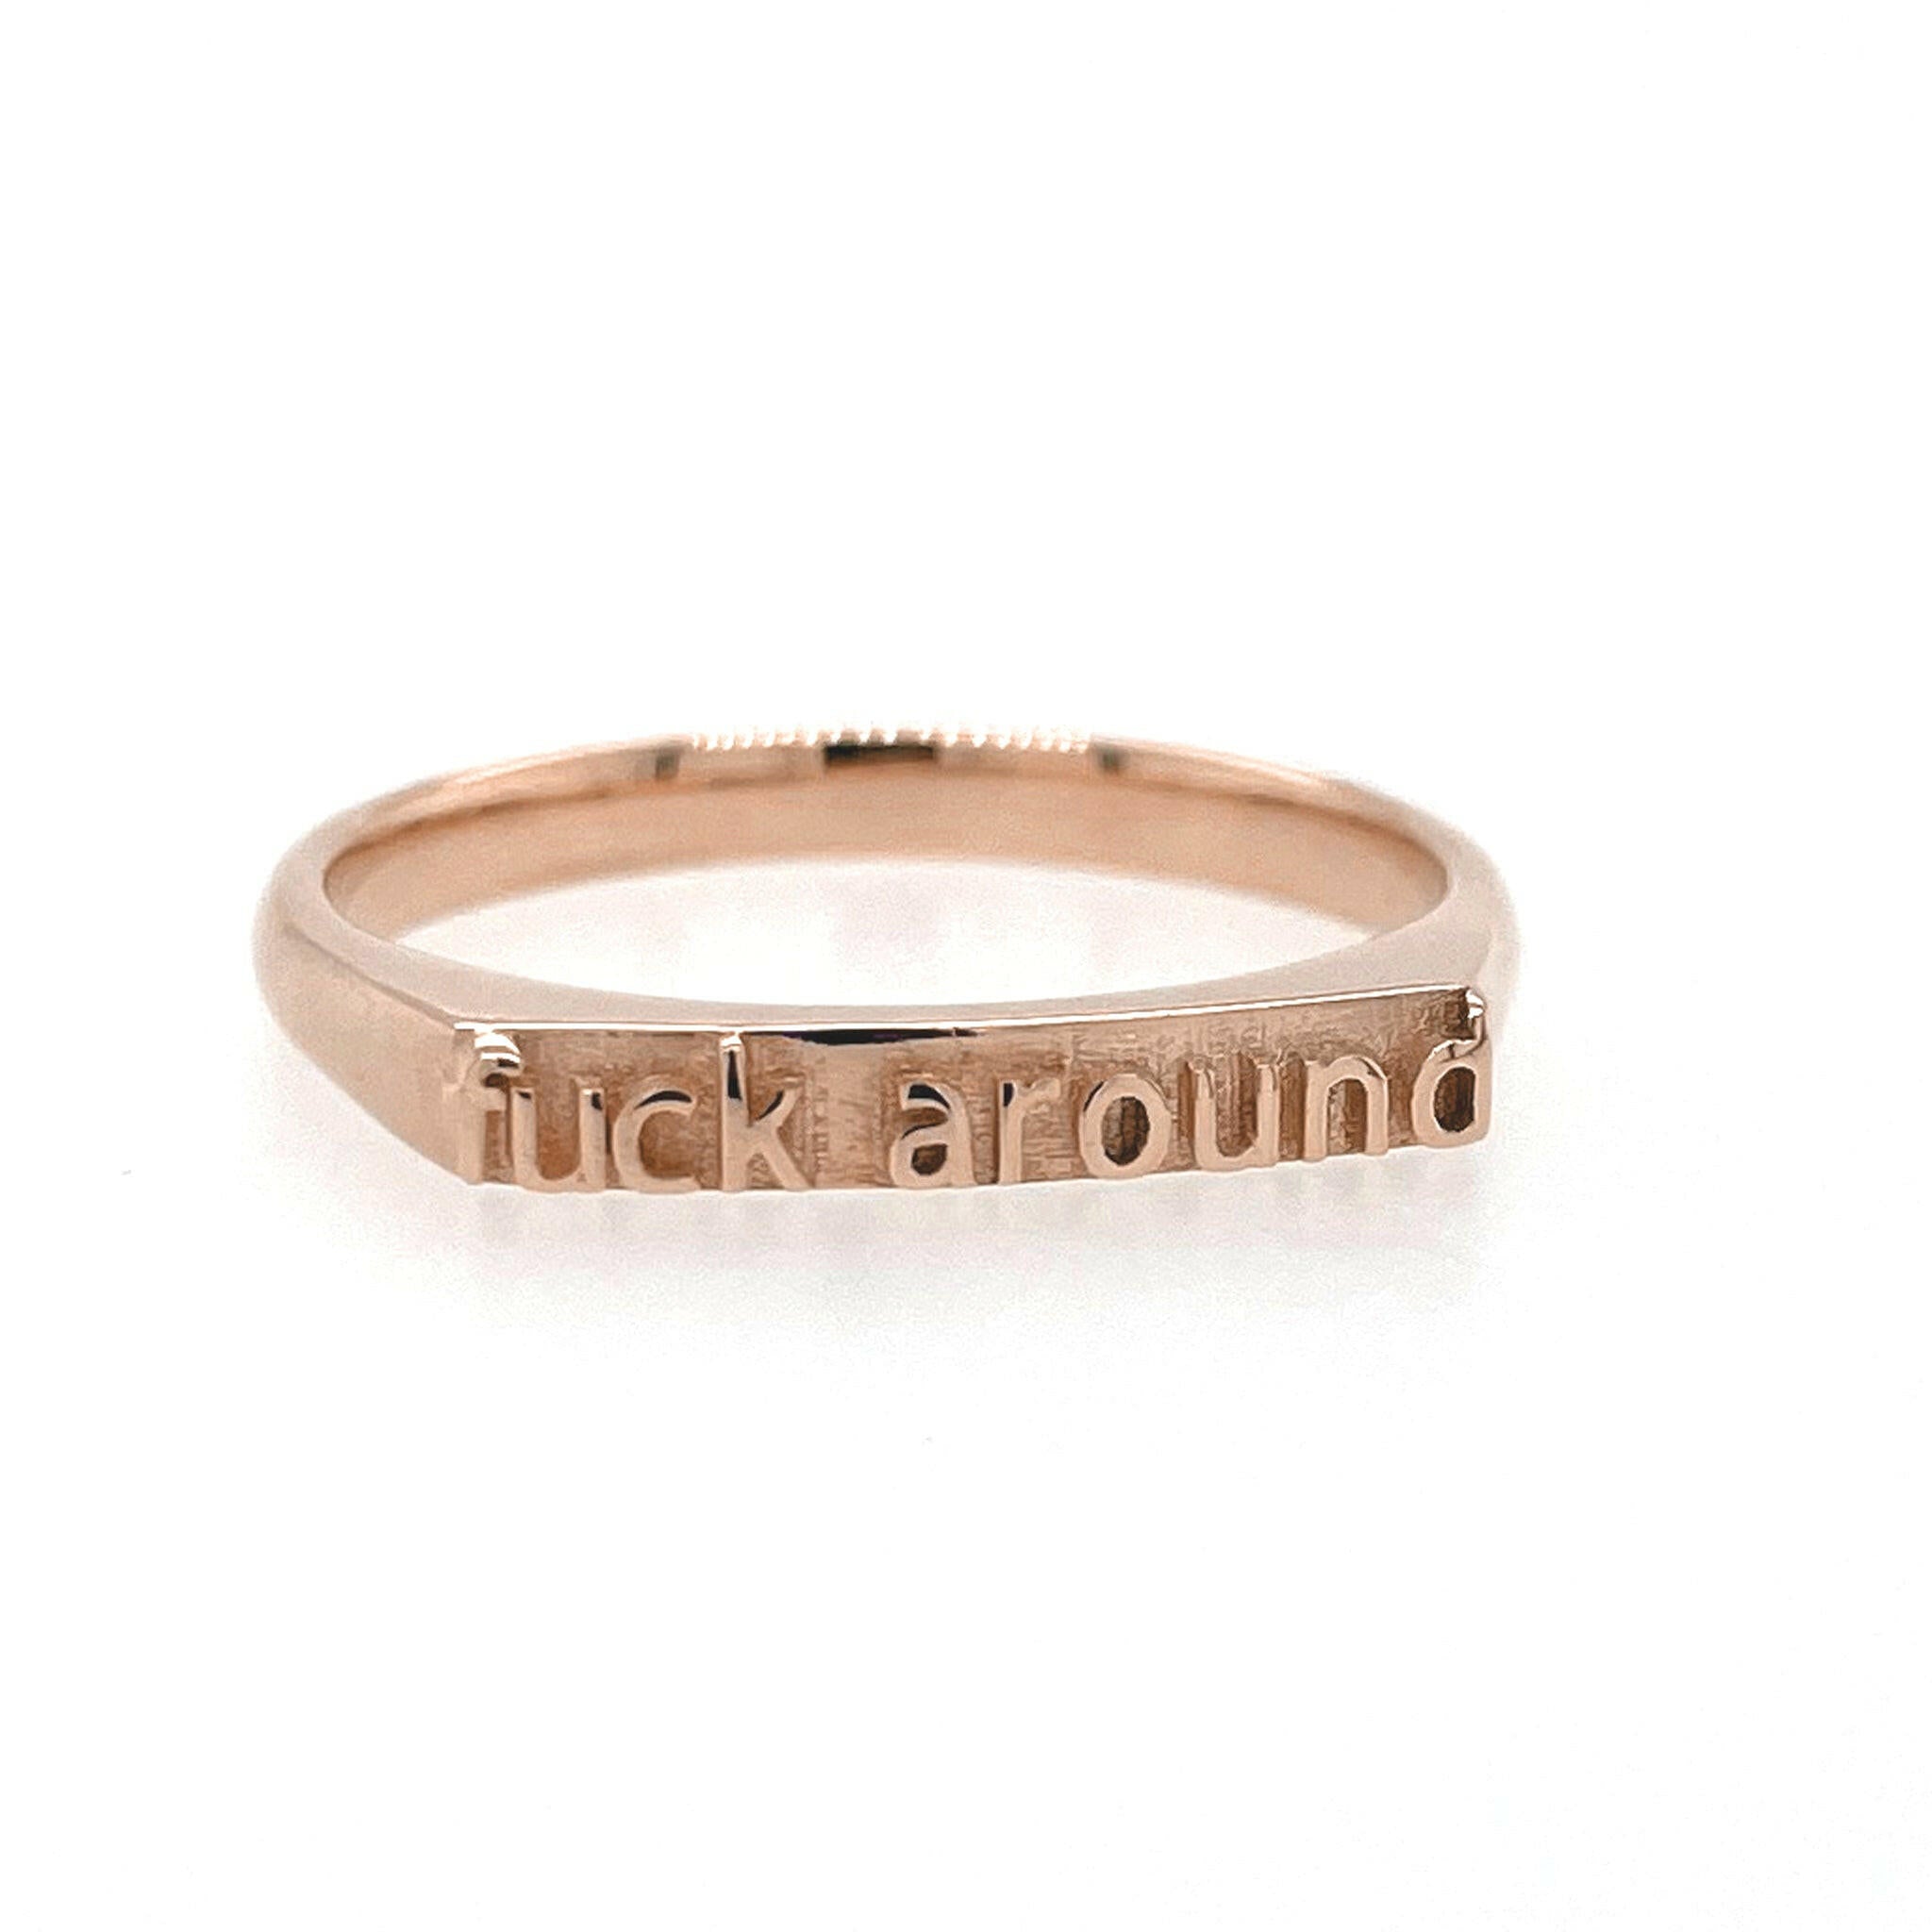 Front view of 14 Karat Rose Gold ring that reads "fuck around" in text.